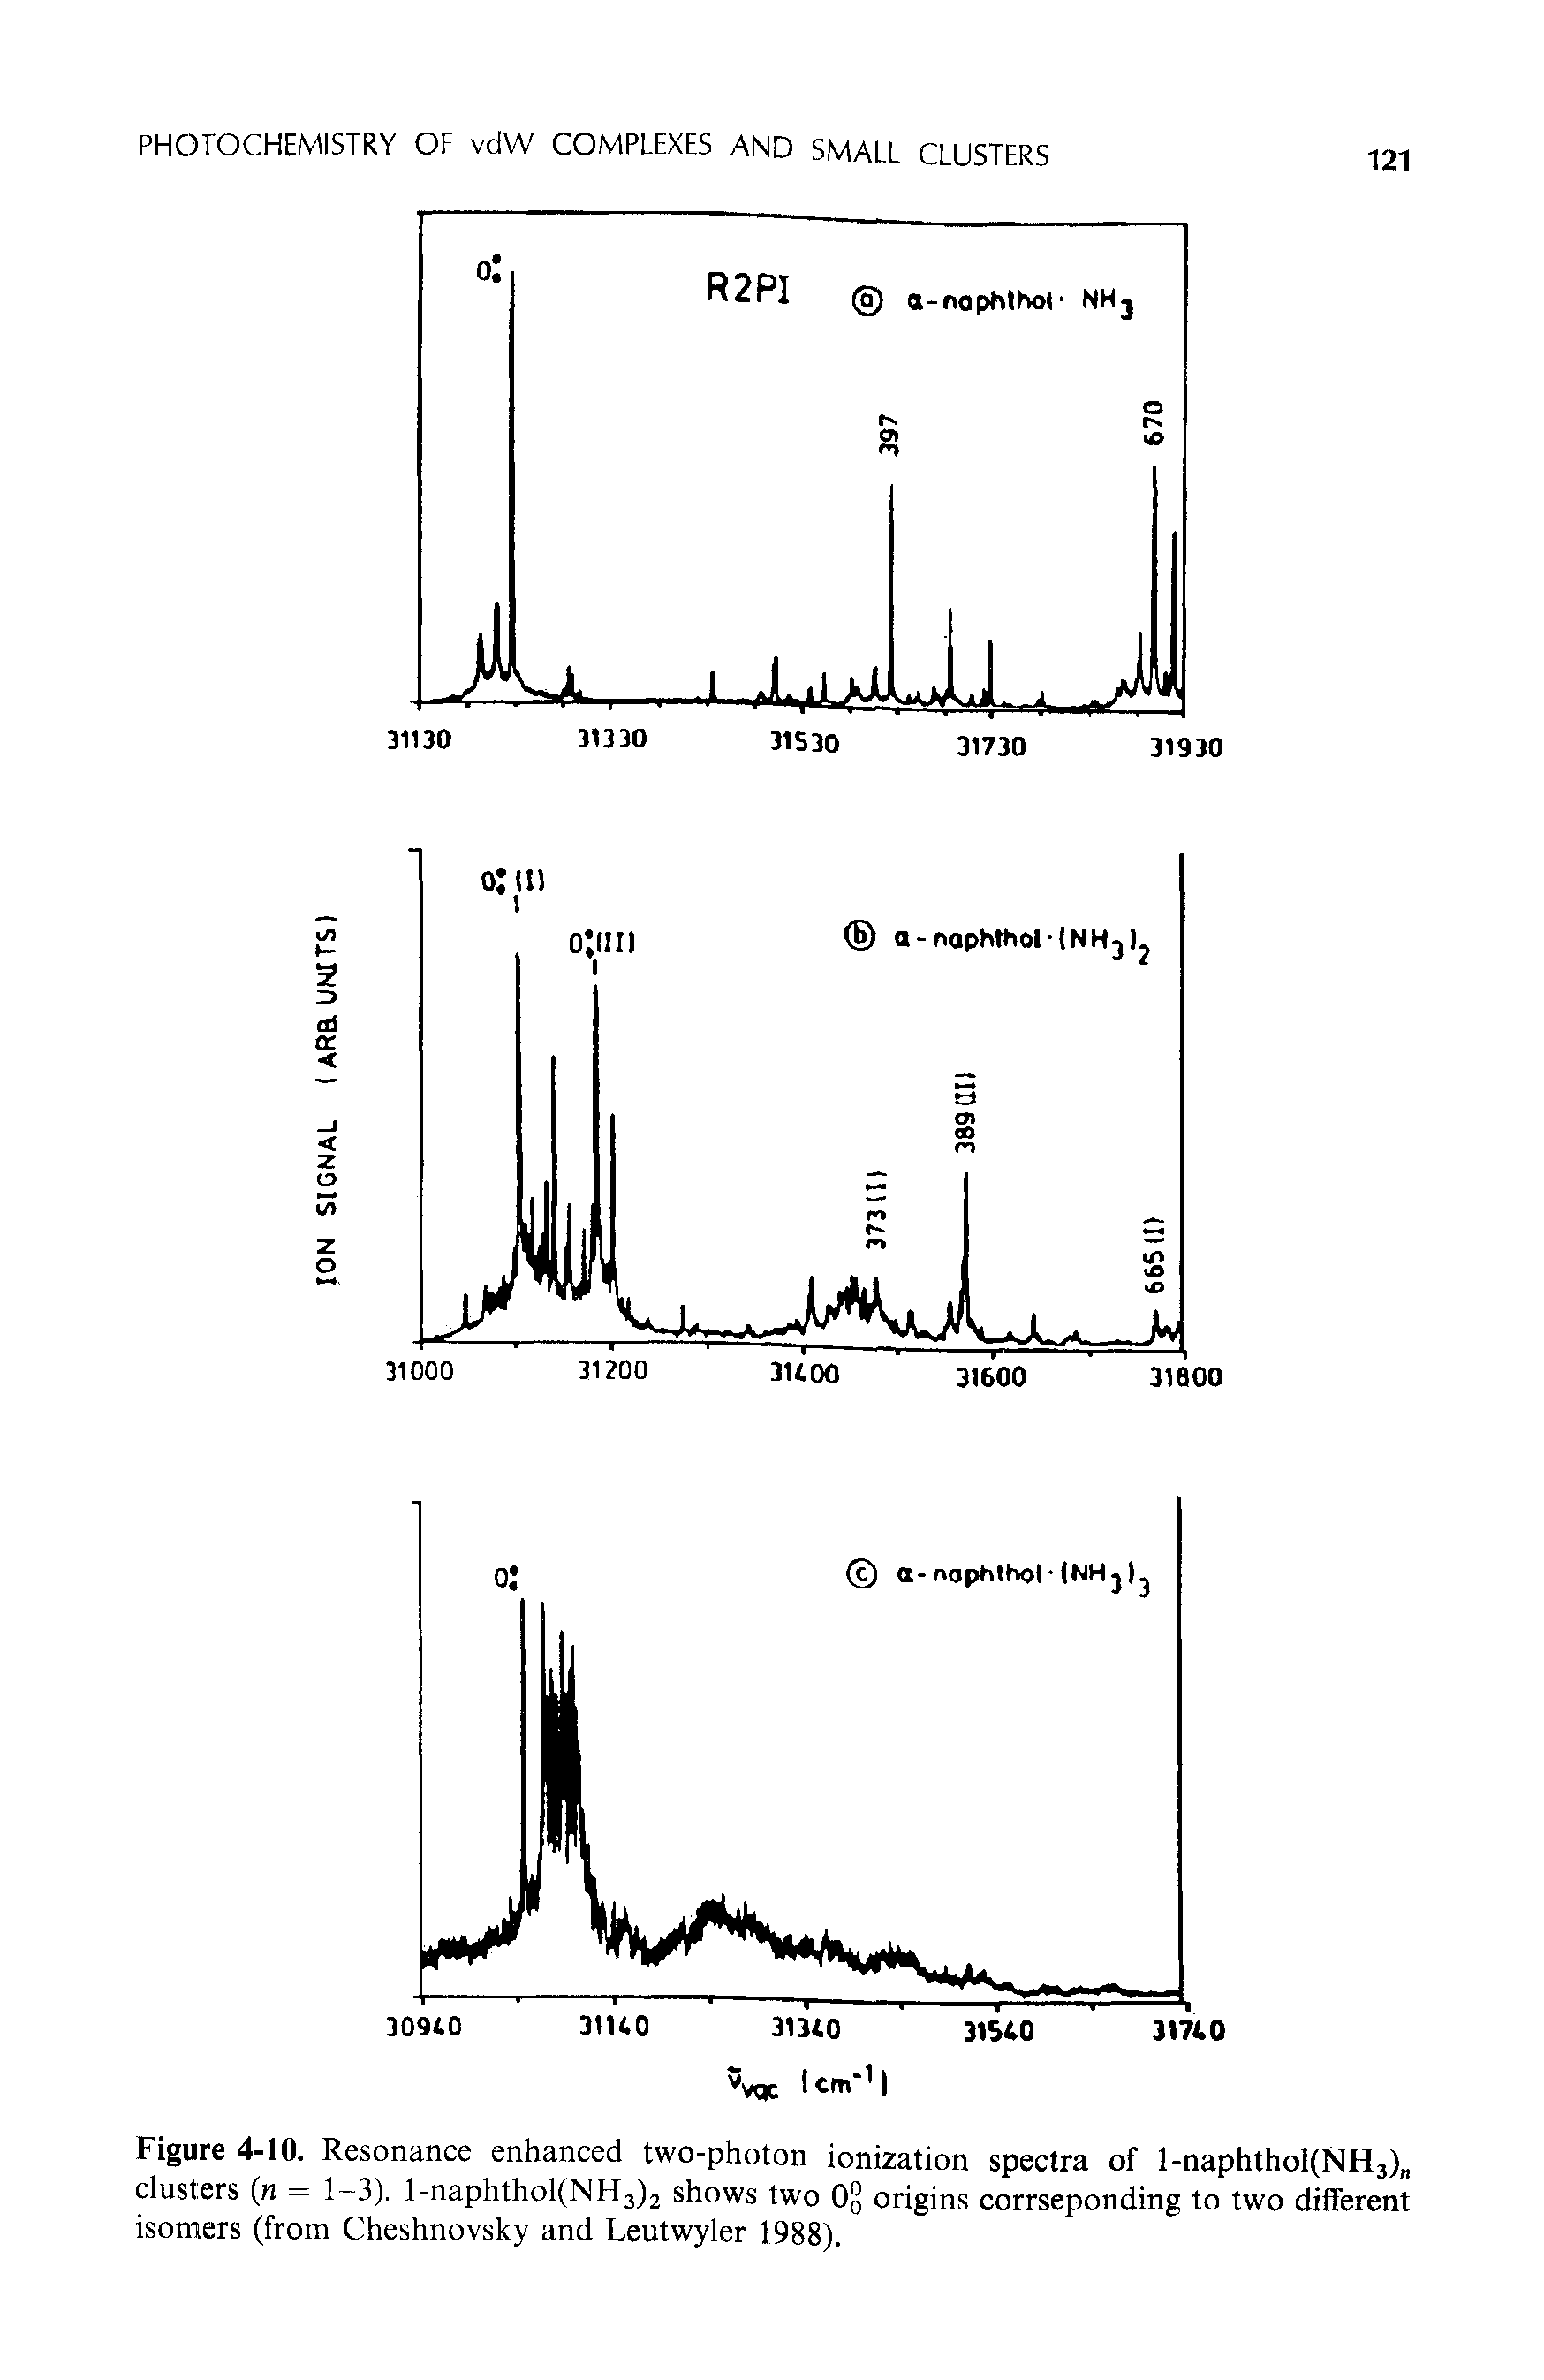 Figure 4-10. Resonance enhanced two-photon ionization spectra of l-naphthol(NH3) clusters (n = 1-3). l-naphthol(NH3)2 shows two 0° origins corrseponding to two different isomers (from Cheshnovsky and Leutwyler 1988).